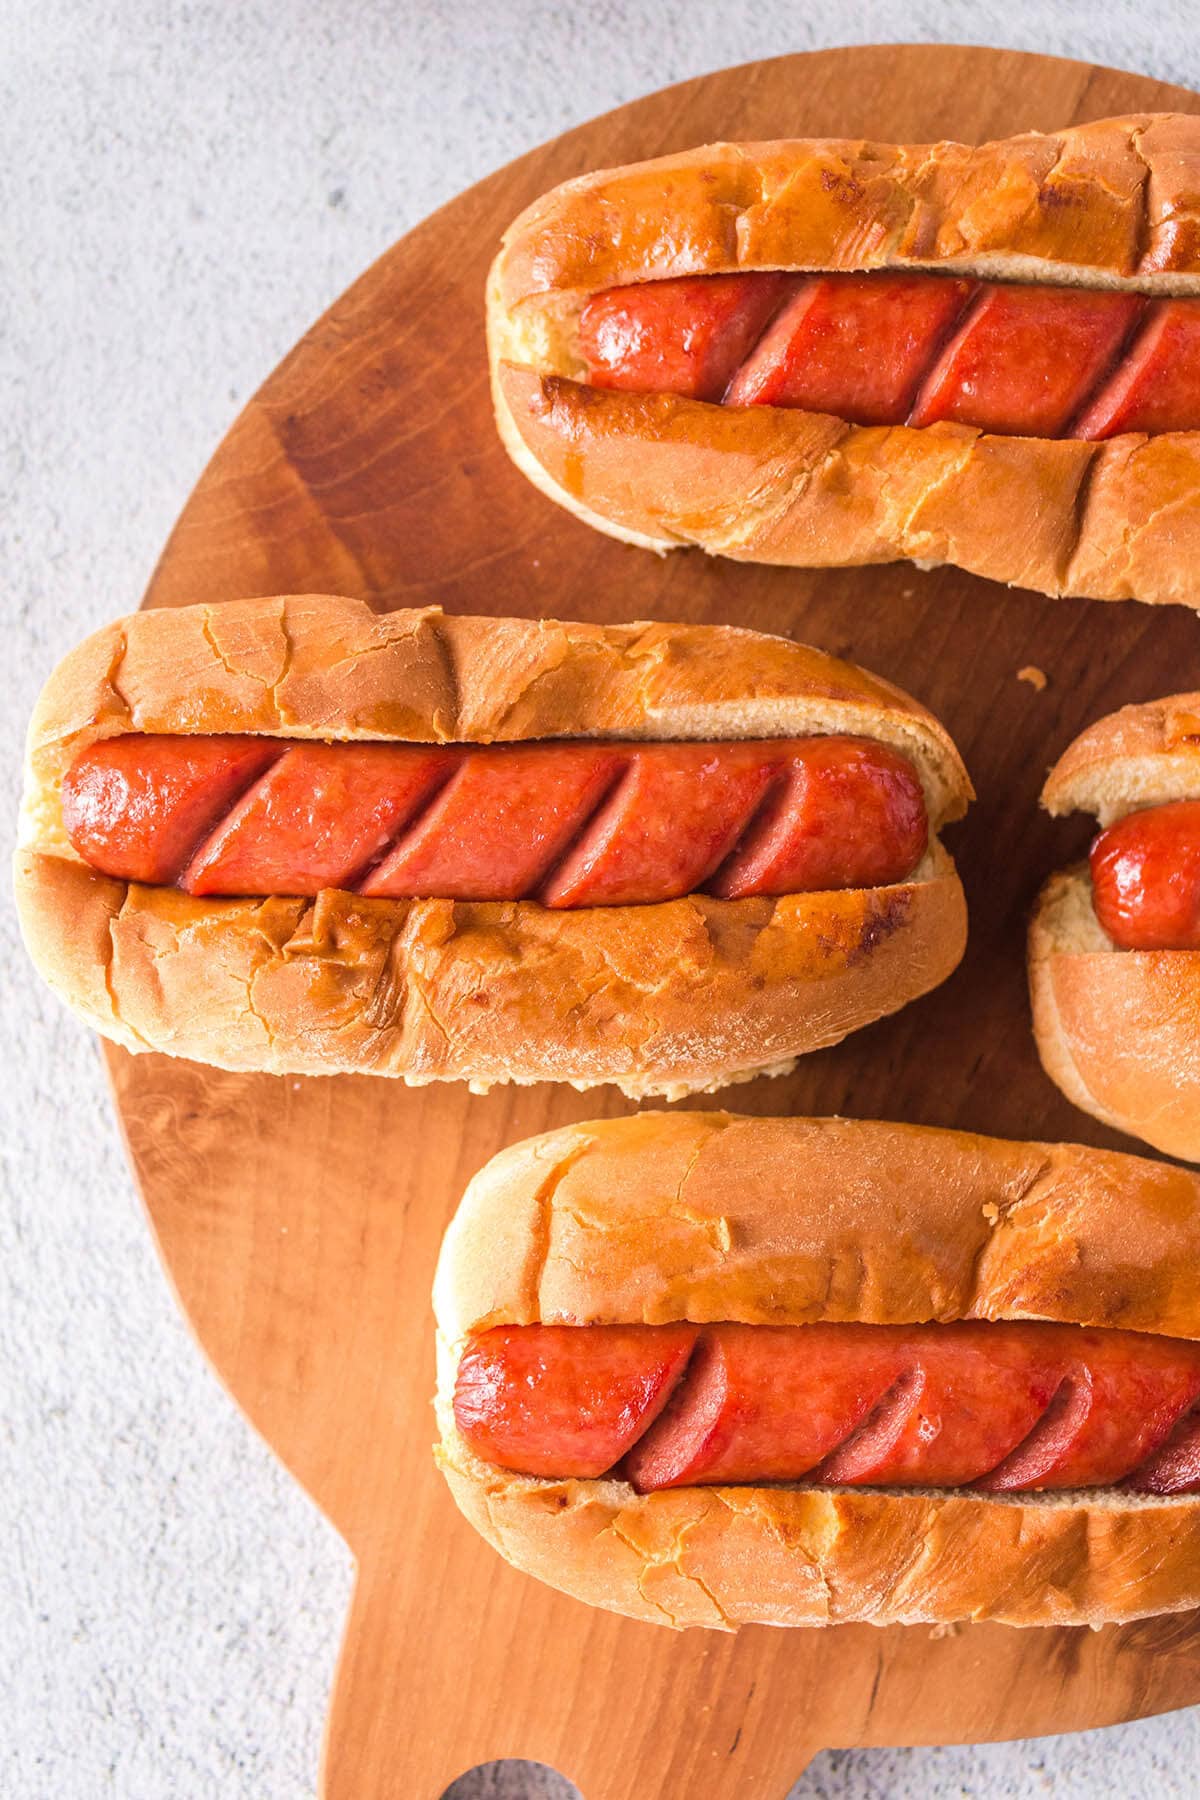 Hot dogs in buns on platter.